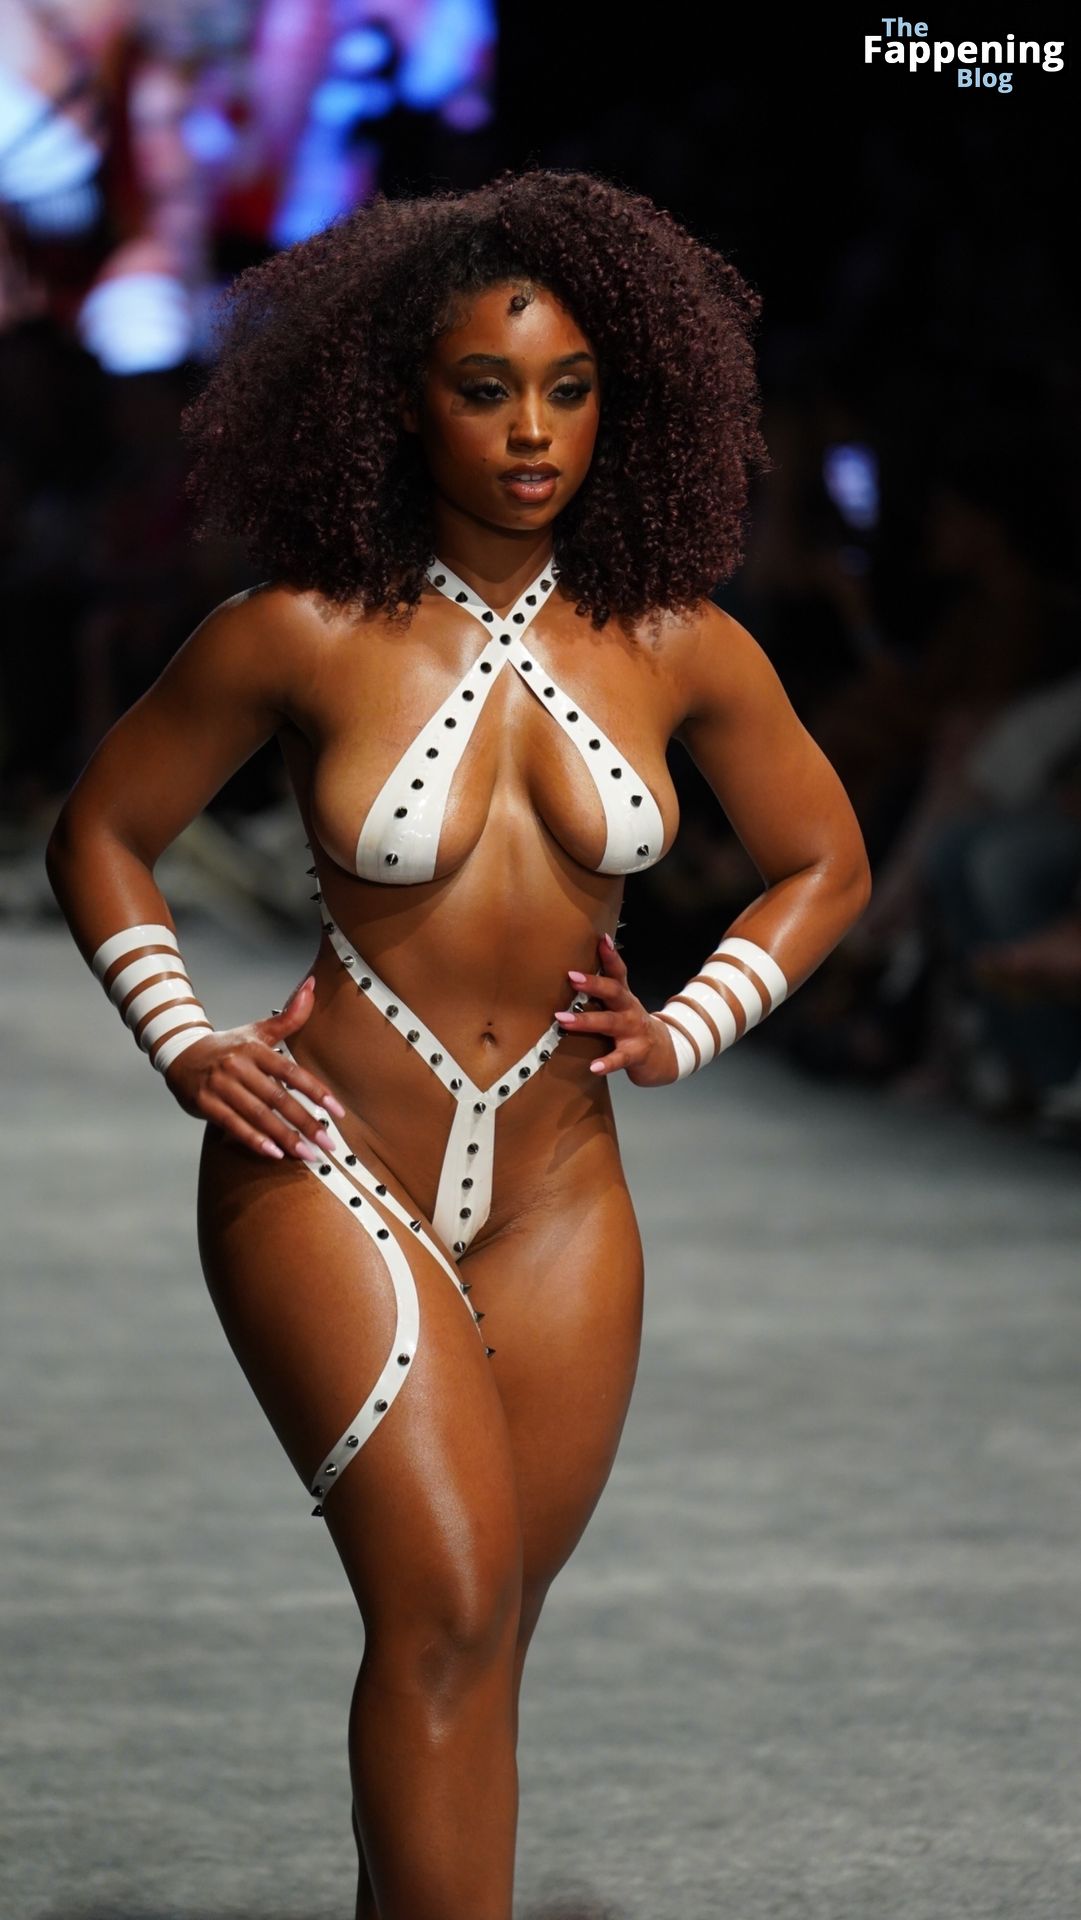 Models Walk in Nothing But Tape for Miami Swim Week Black Tape Project (60  Photos) | TheFappening